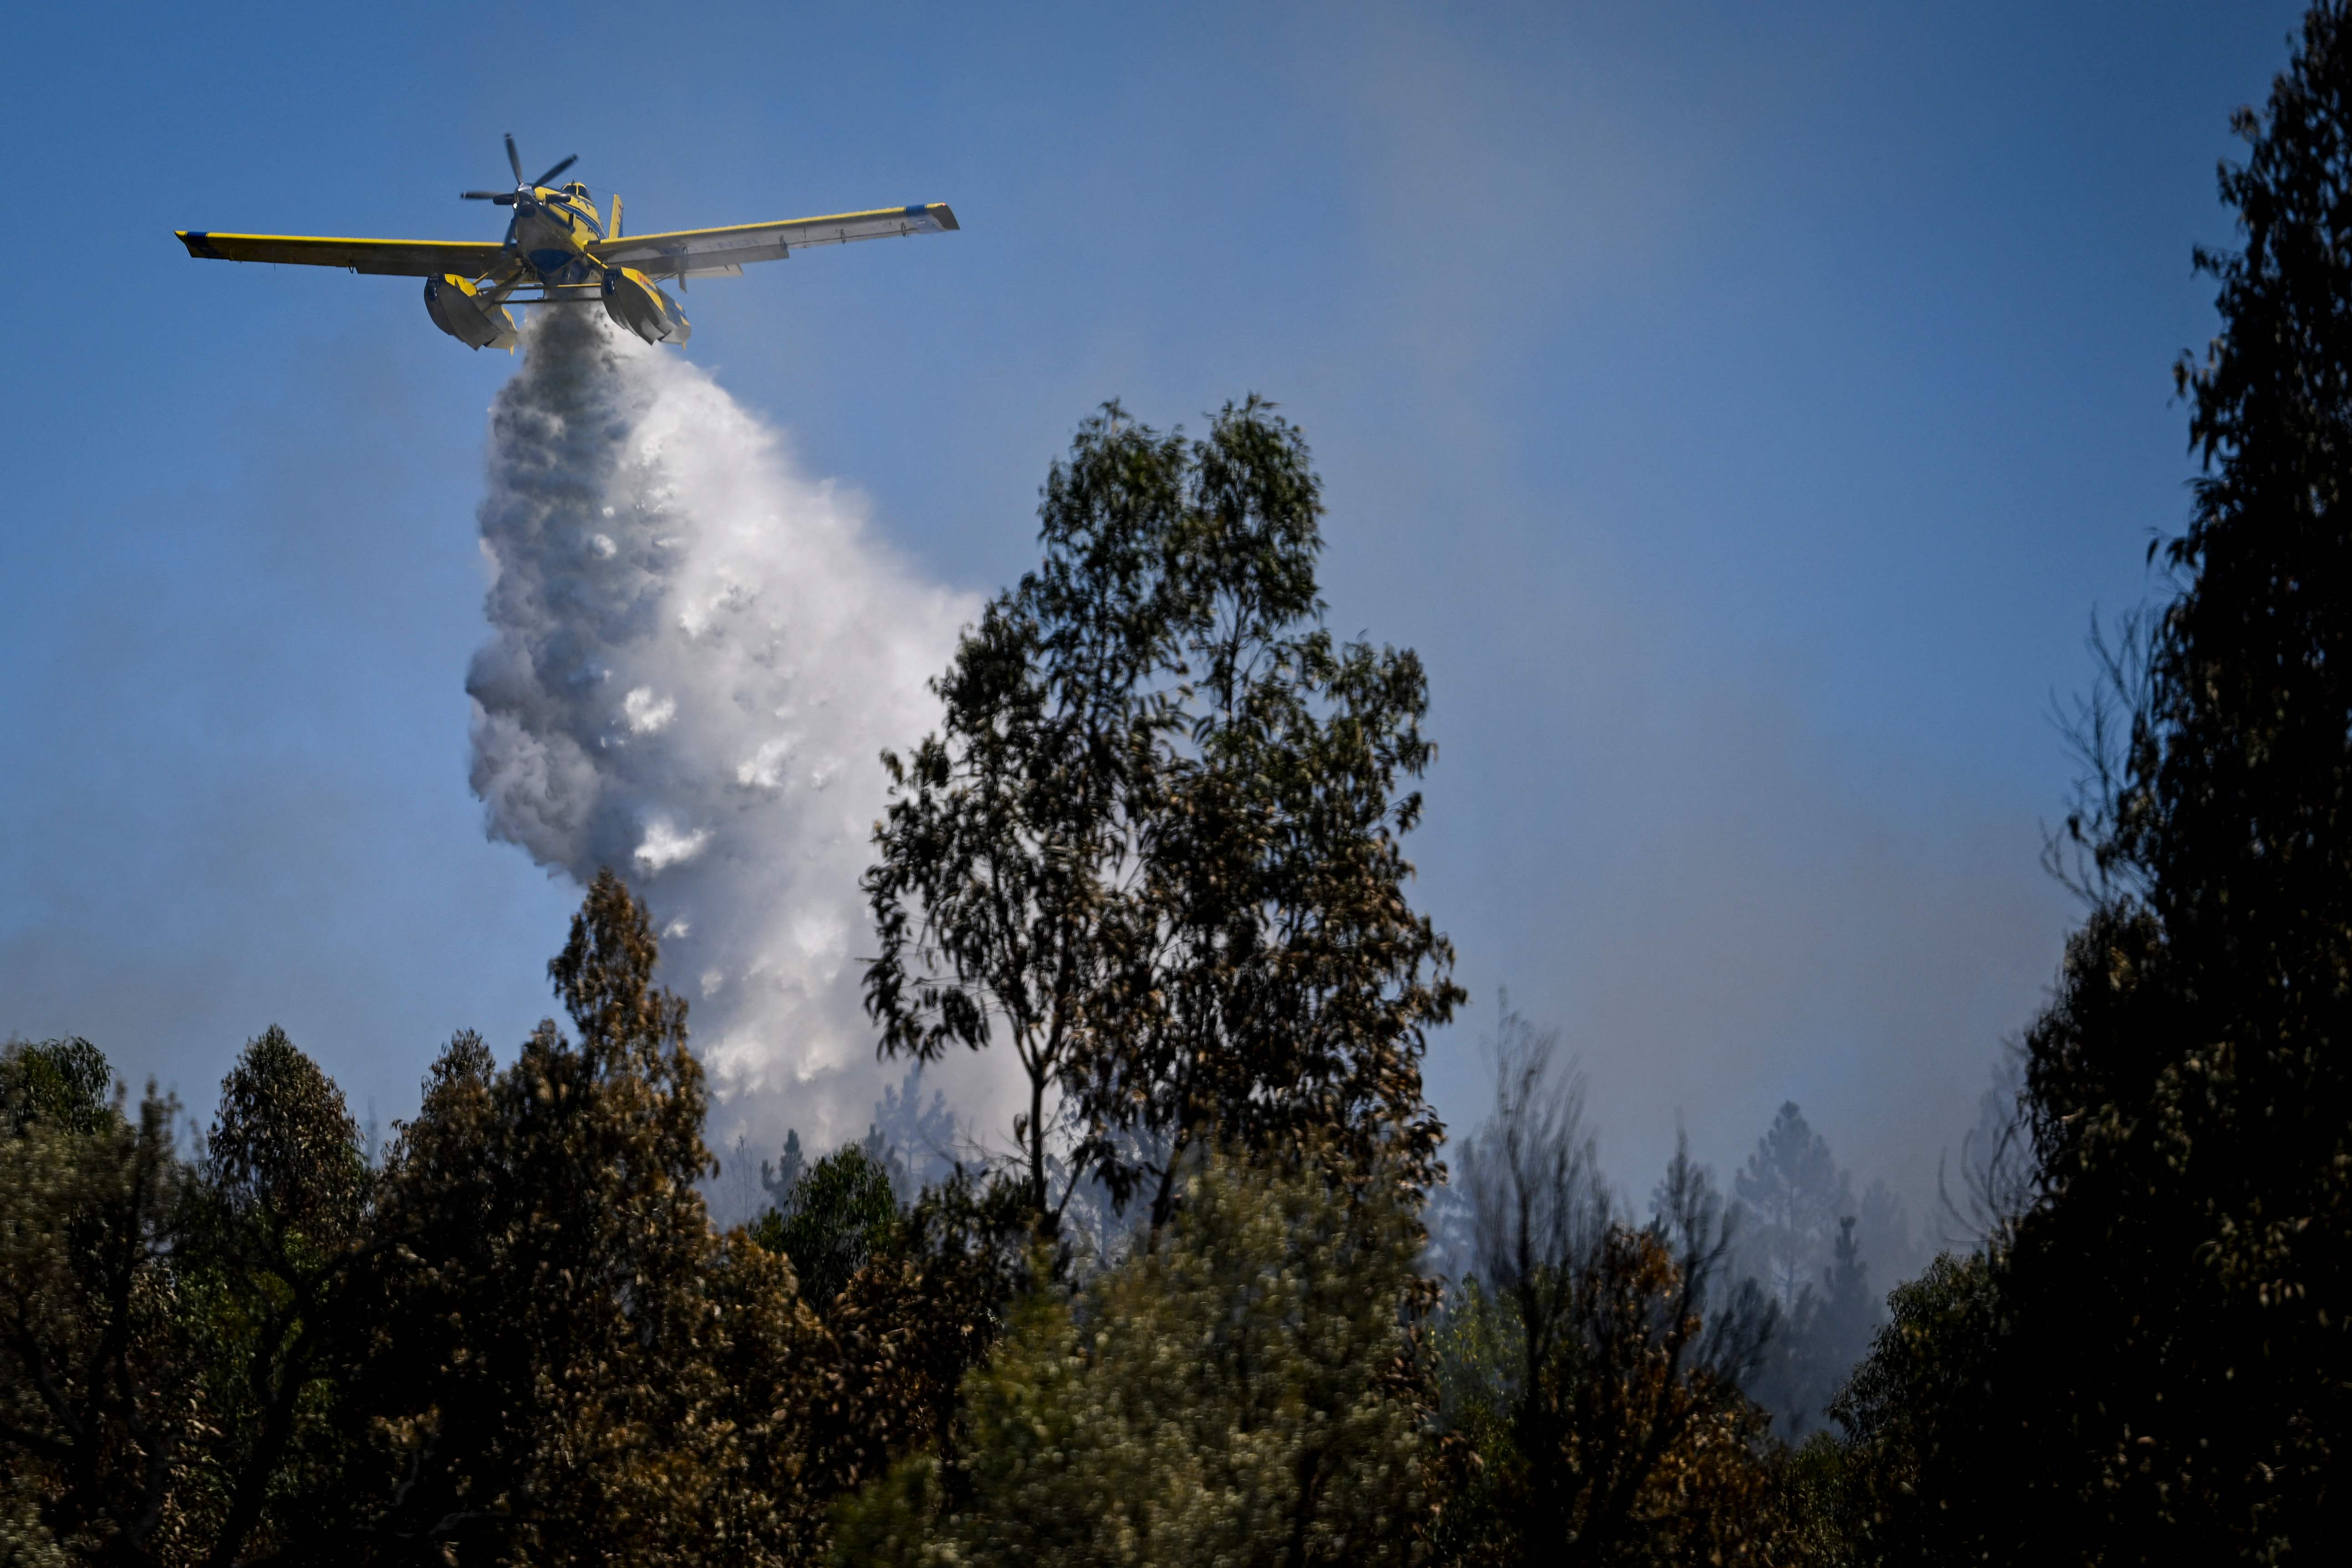 A firefighter airplane drops water in a wildfire in Carrascal, Proenca a Nova